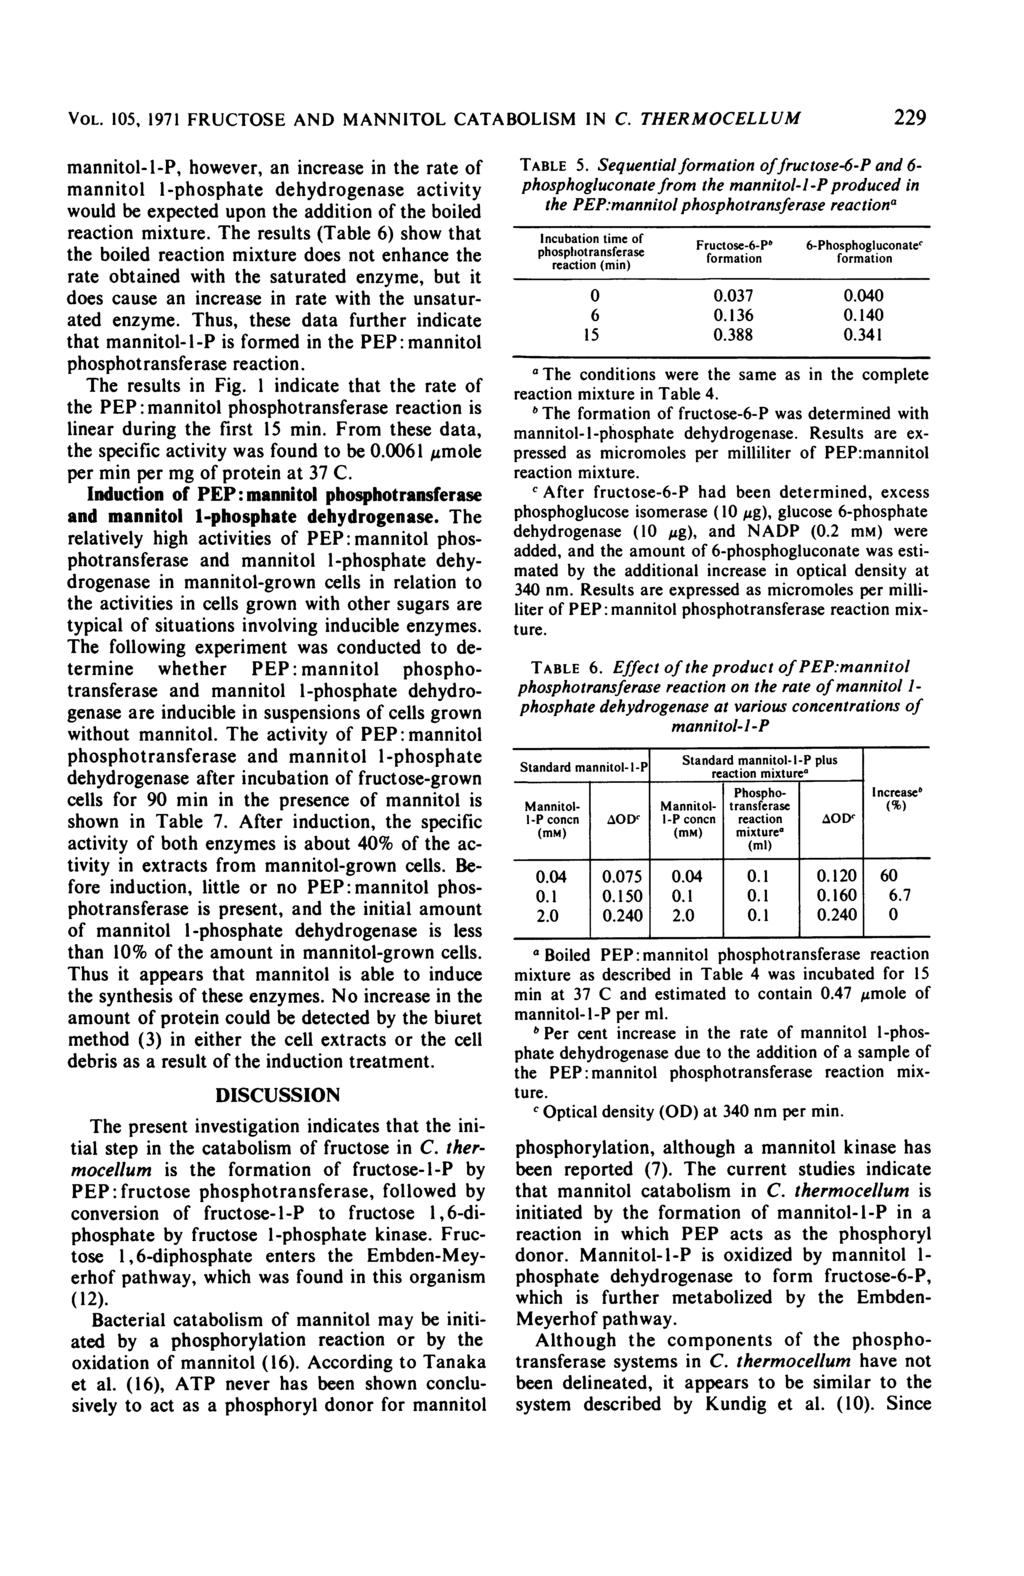 VOL. 105, 1971 FRUCTOSE AND MANNITOL CATABOLISM IN C.